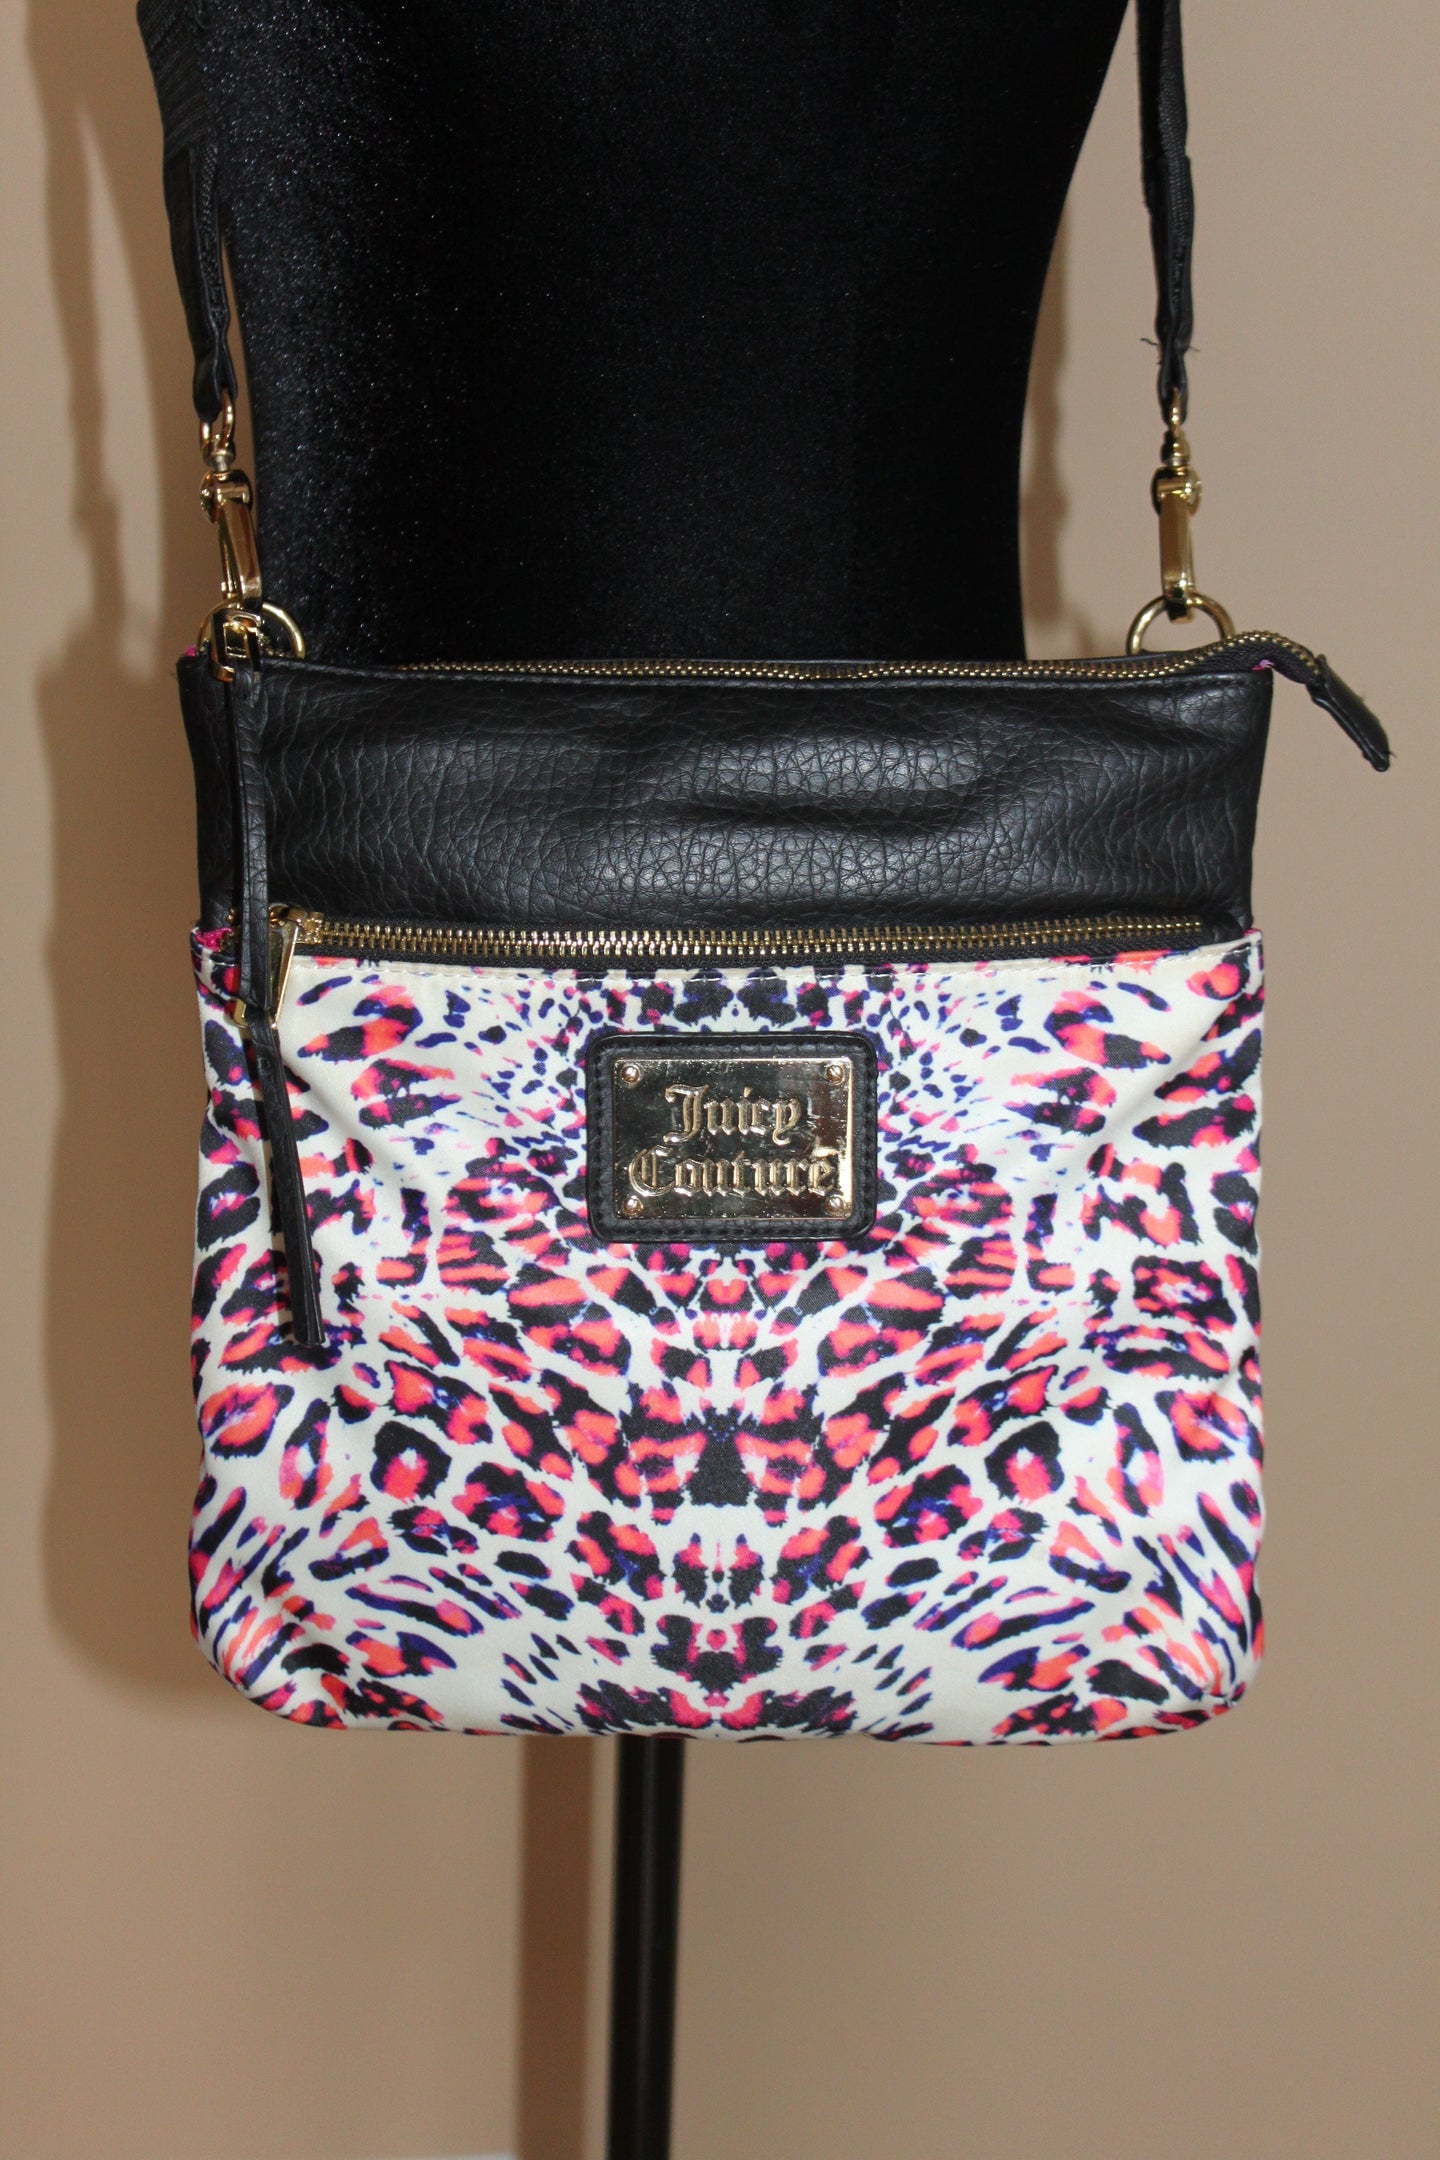 Handbags - Juicy Couture Crossbody Bag - Black and Pink eclectic pattern - Excellent Condition HB049